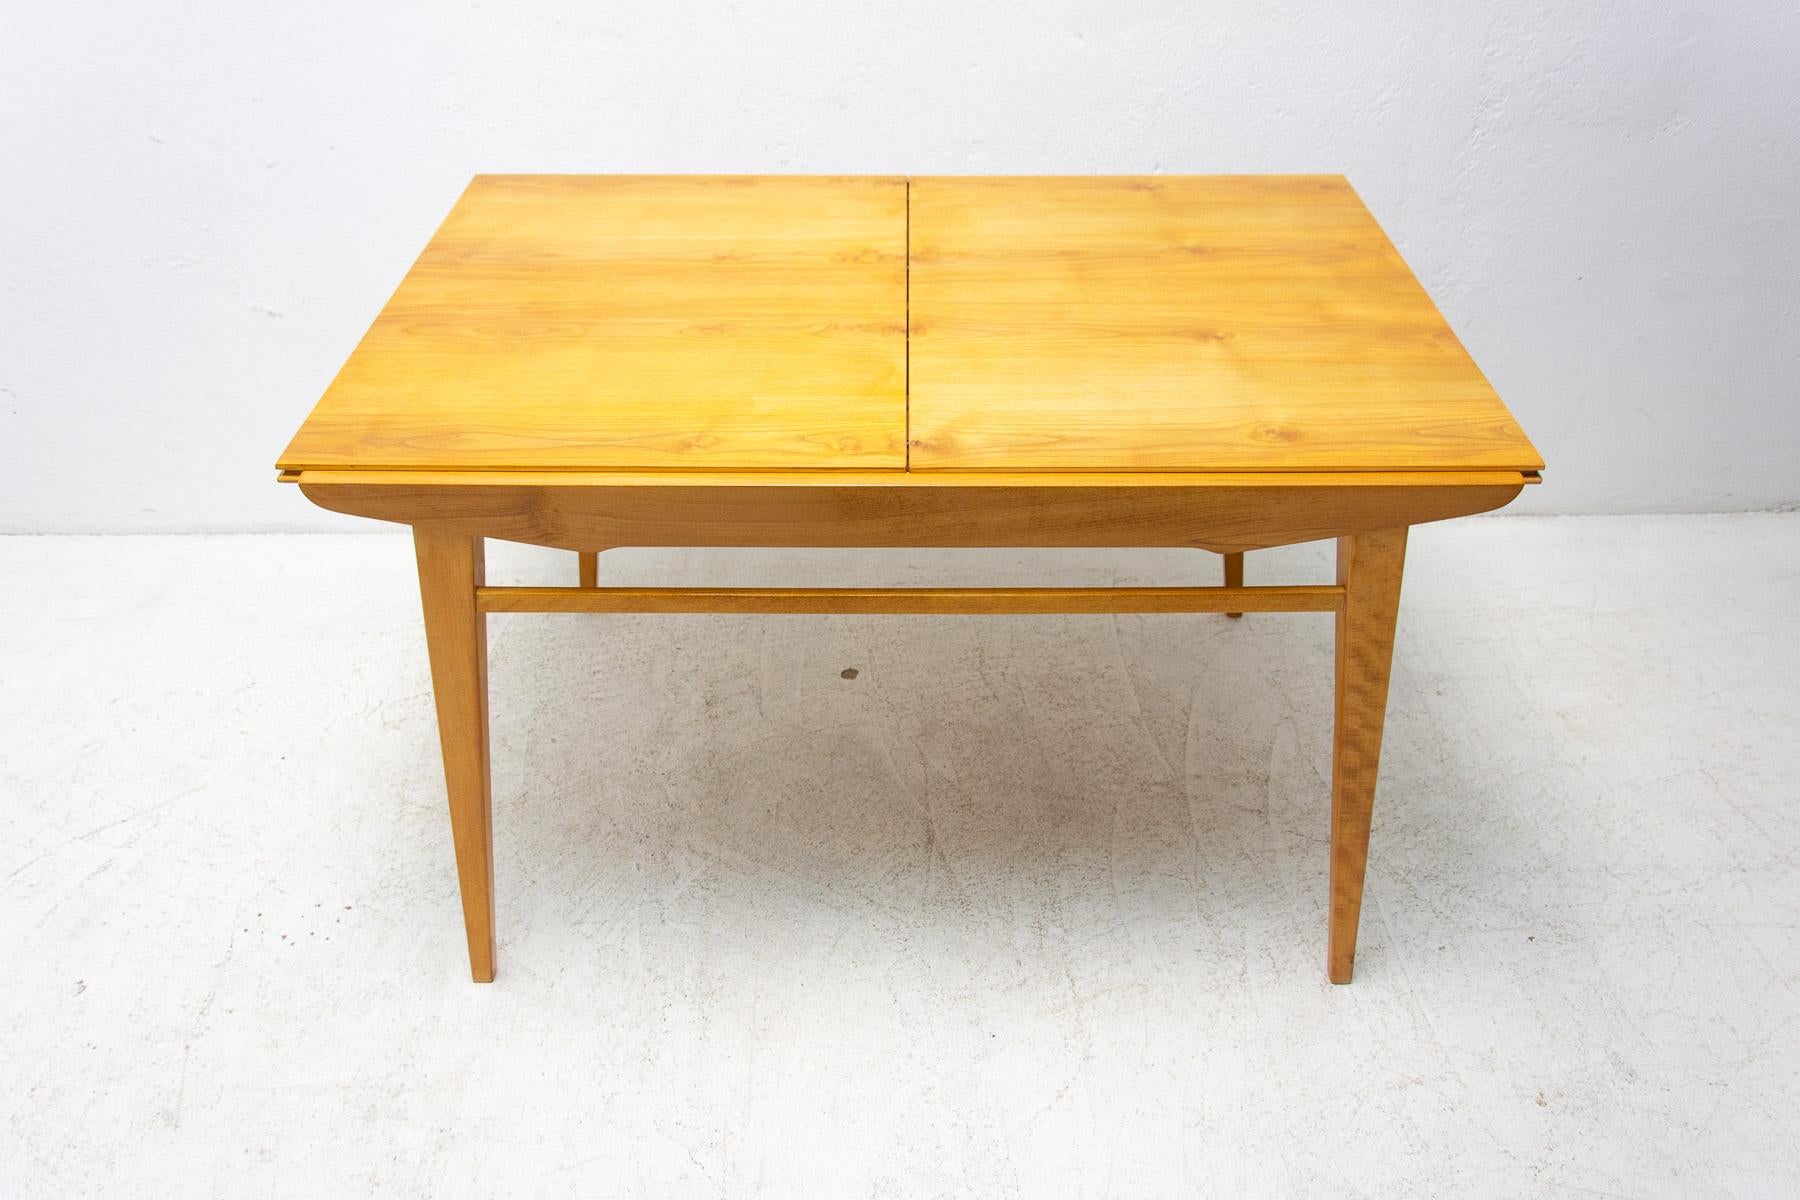 20th Century Midcentury Folding Dining Table by Bohumil Landsman for Jitona, 1970s For Sale